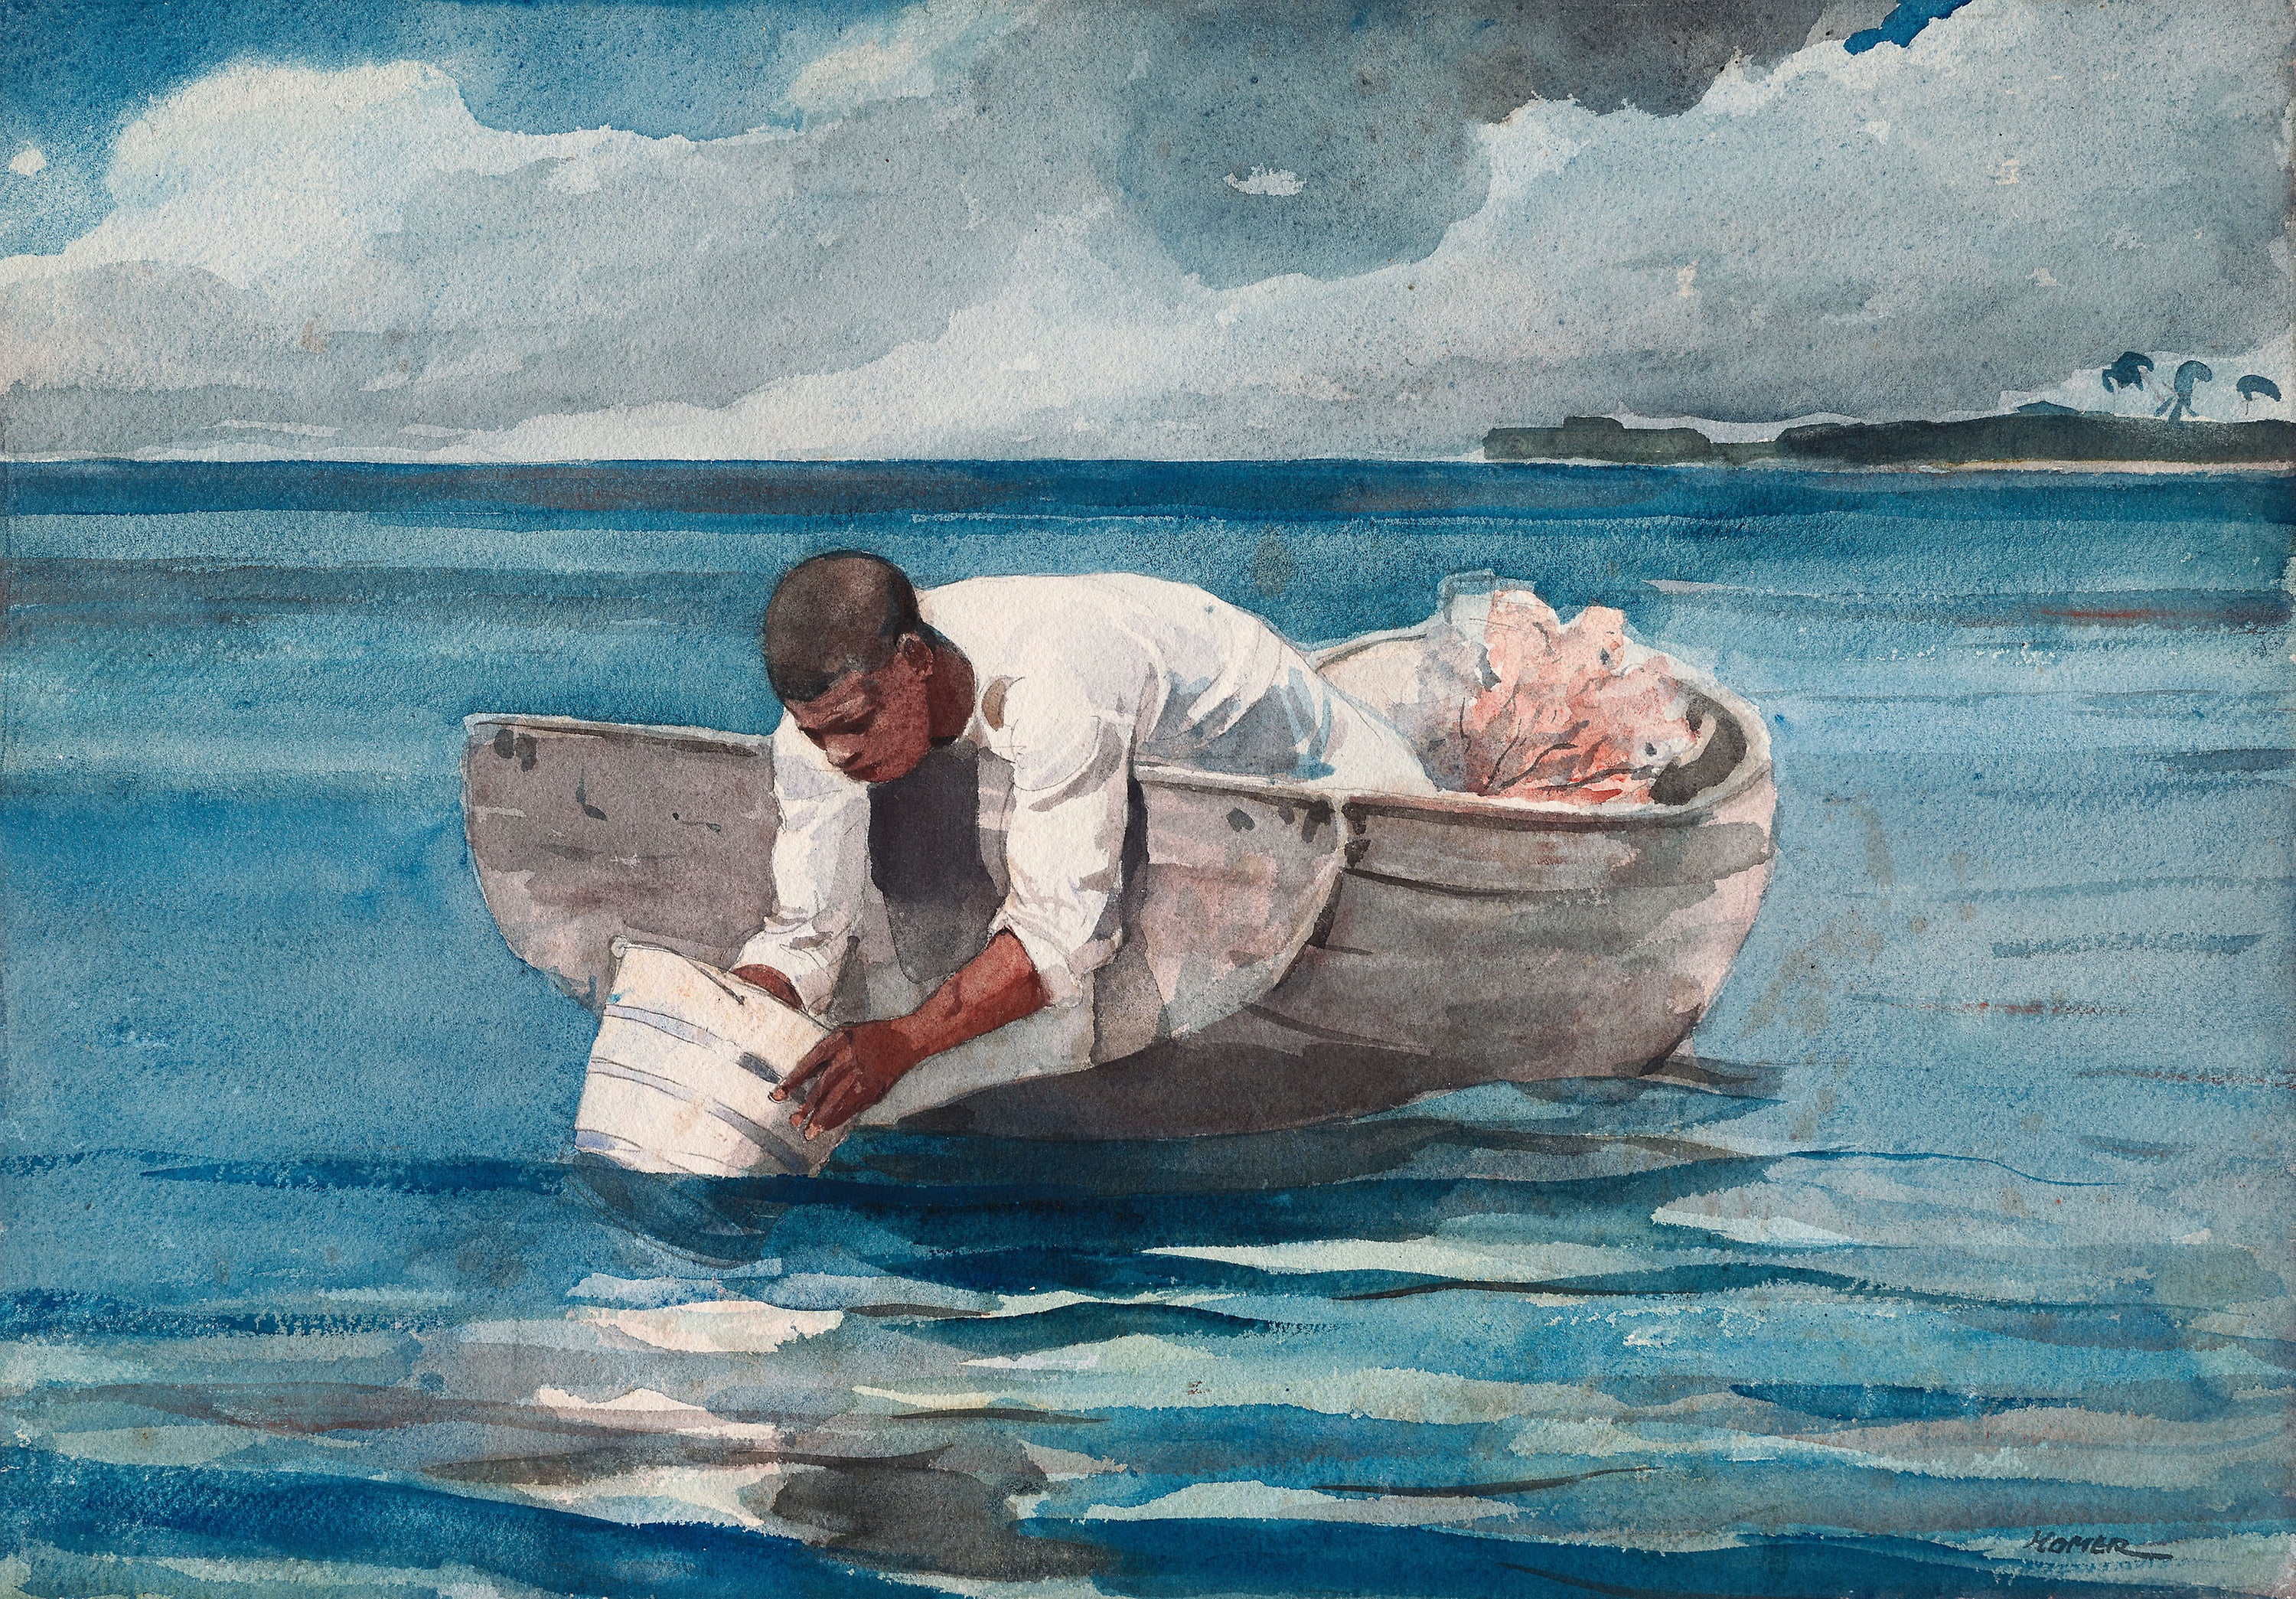 Winslow Homer, painting, impressionism, water, river